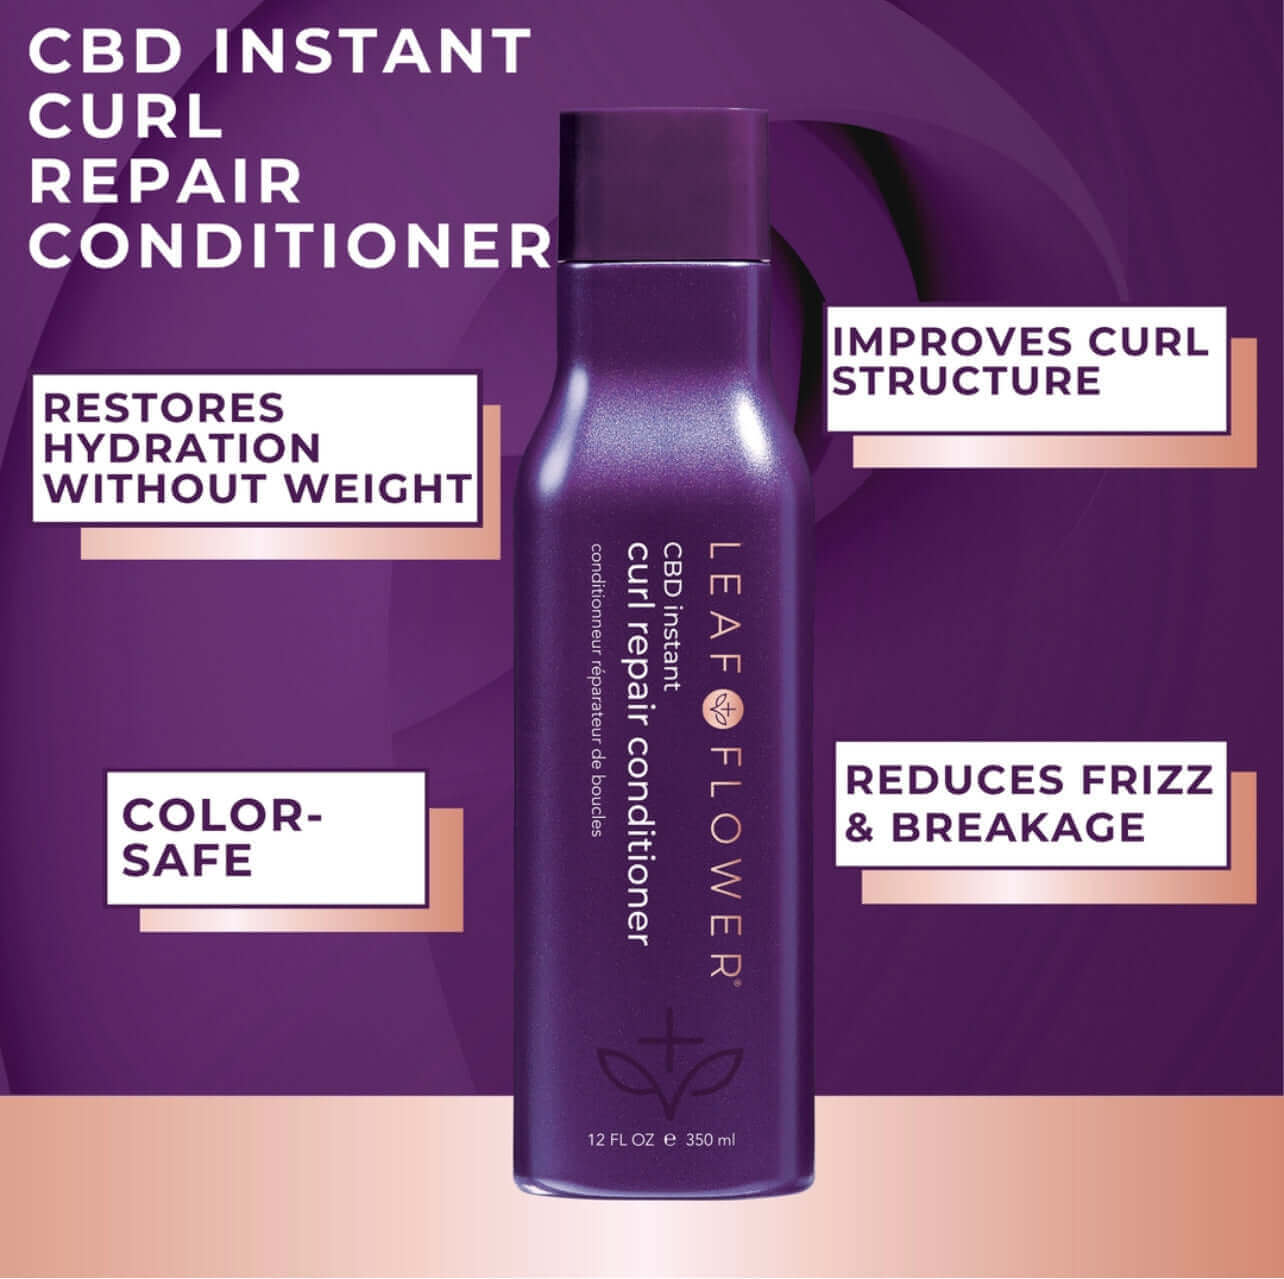 Purple bottle of Leaf and Flower Instant Curl Repair Conditioner, advertised to restore moisture, improve curl structure for all curl types, reduce frizz, and be color-safe.